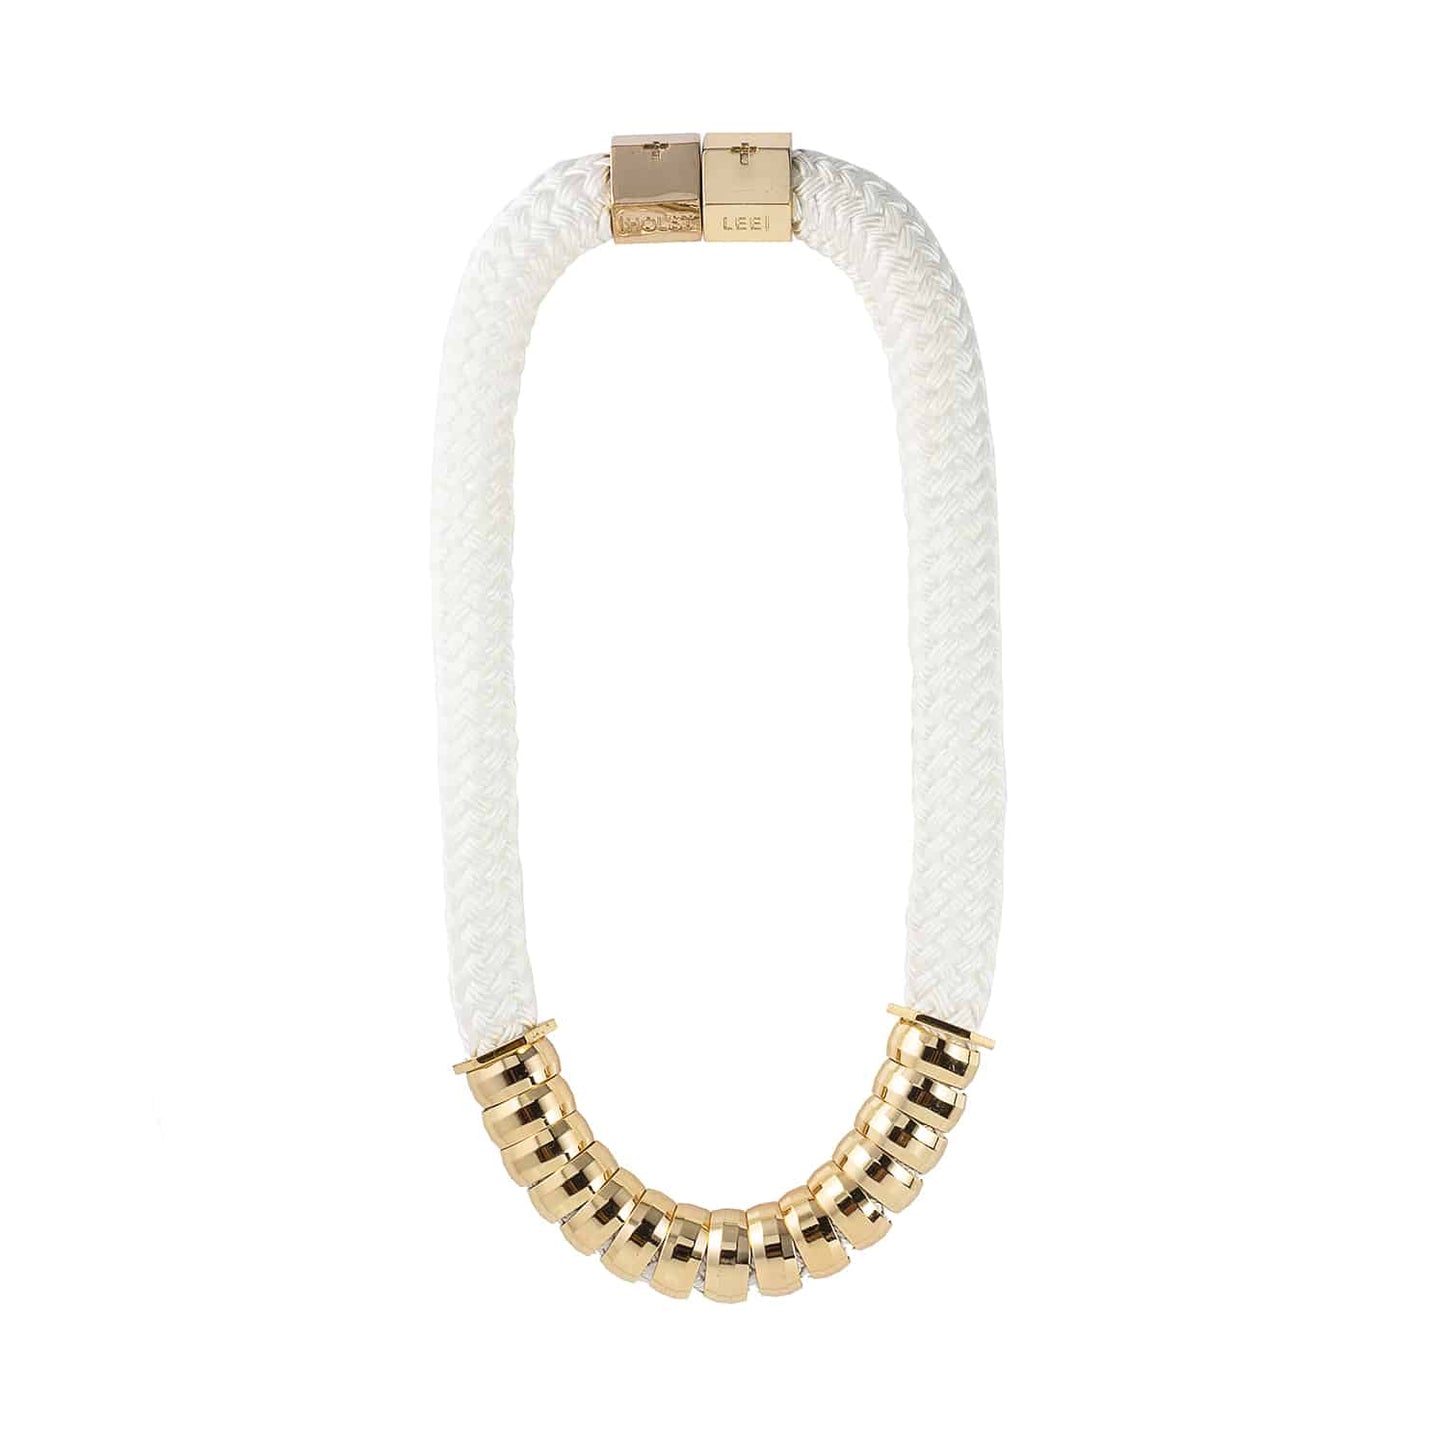 Holst & Lee Classic White Necklace